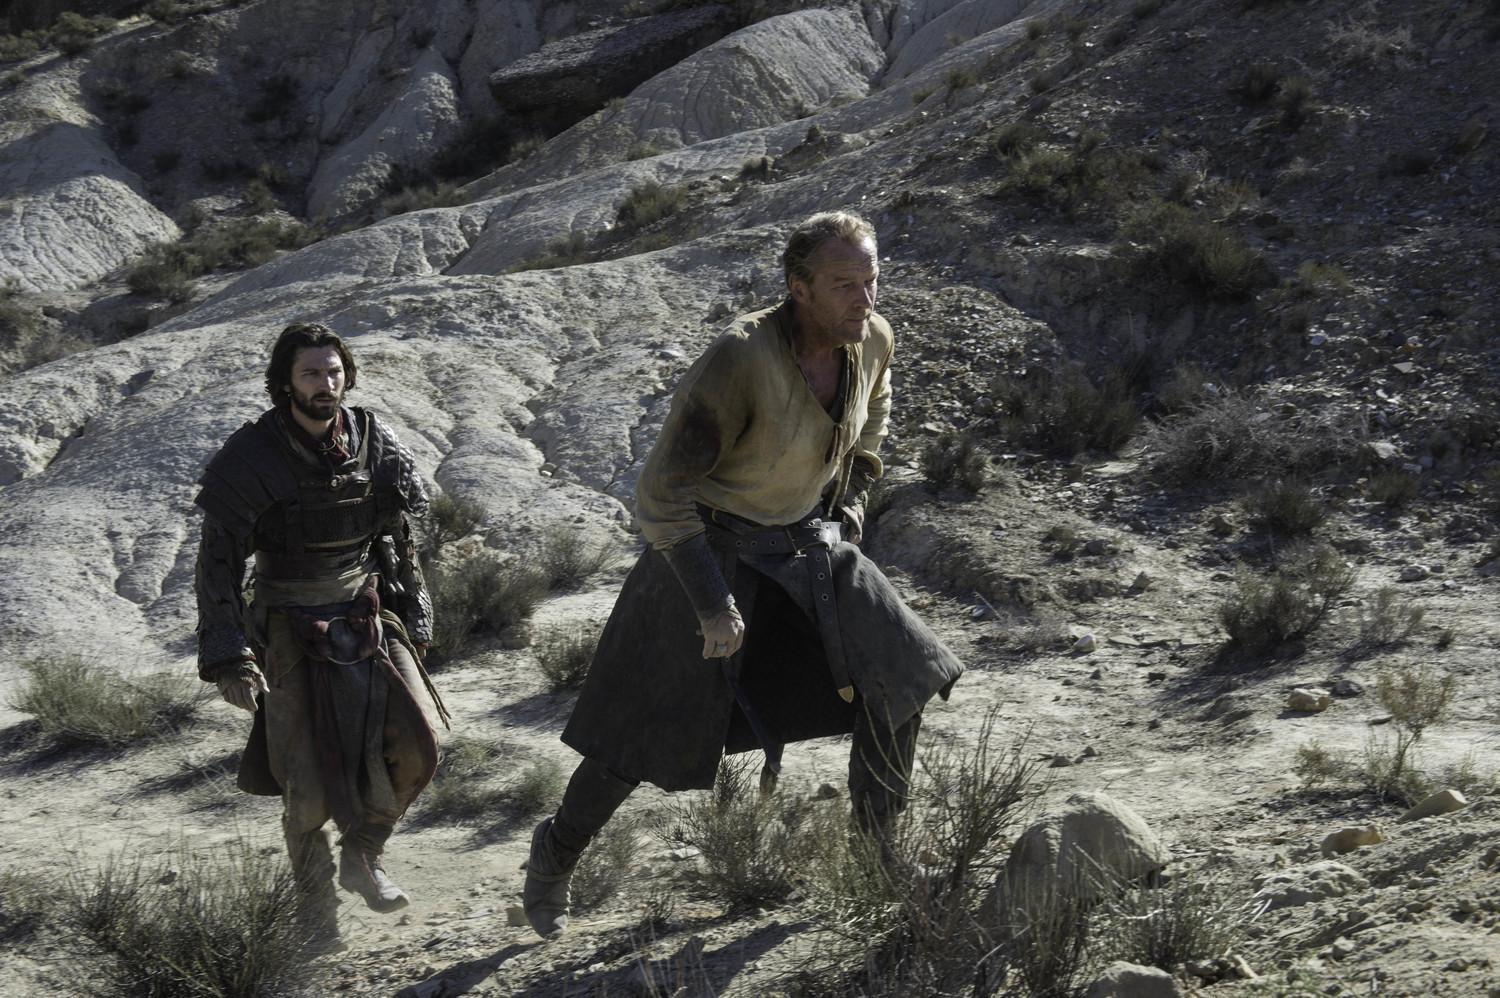 [Updated!] New photos from Game of Thrones Season 6, Episode 4 1500 x 998